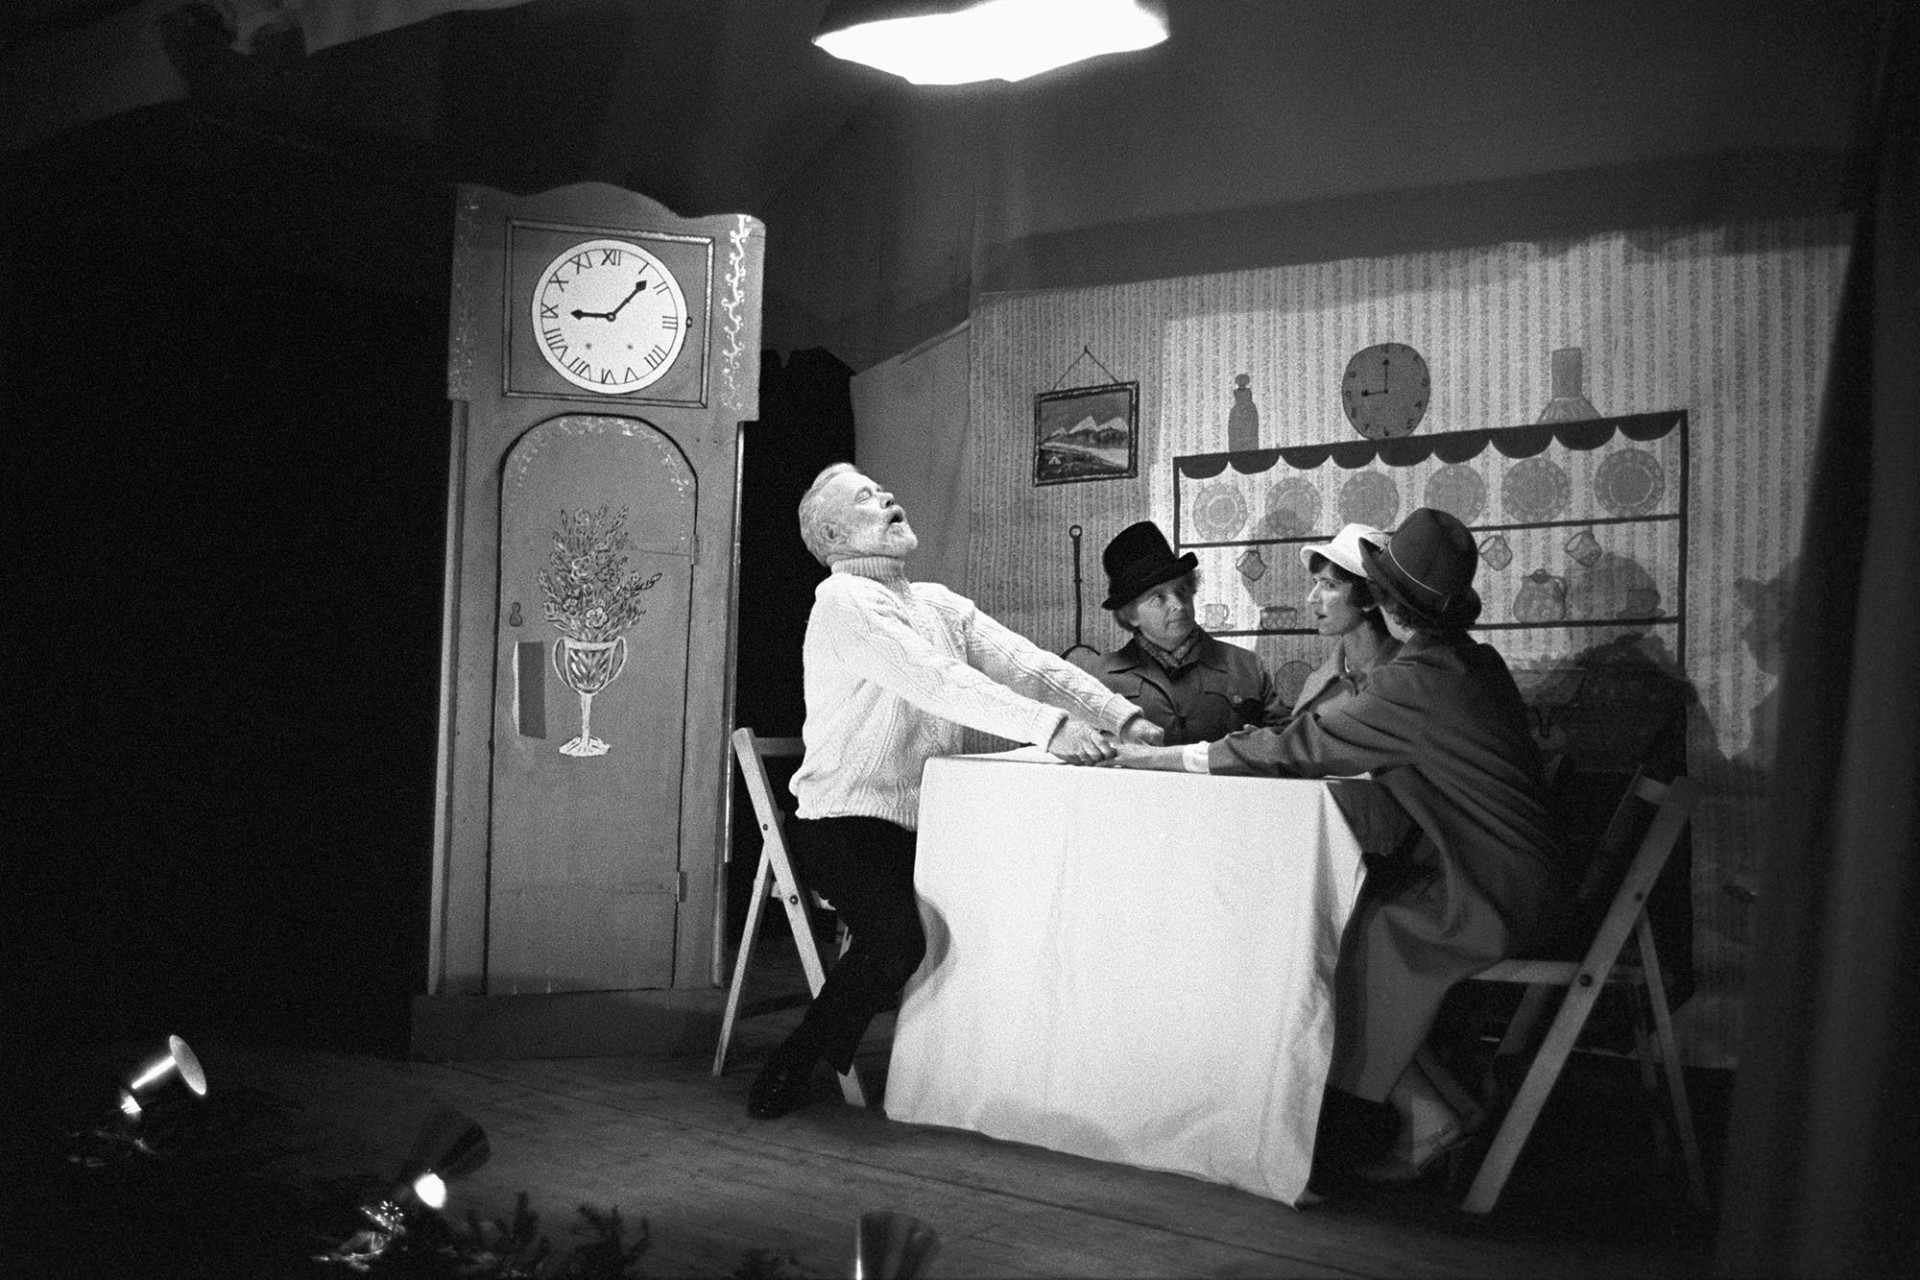 Christmas entertainment in village hall, scene from play, Actor in clock !! <br />
[The Women's Institute Christmas play in High Bickington village hall. An actor is hiding in the clock. The performers from left to right are Mr Harpum, Chris England and Glenda Tucker.]